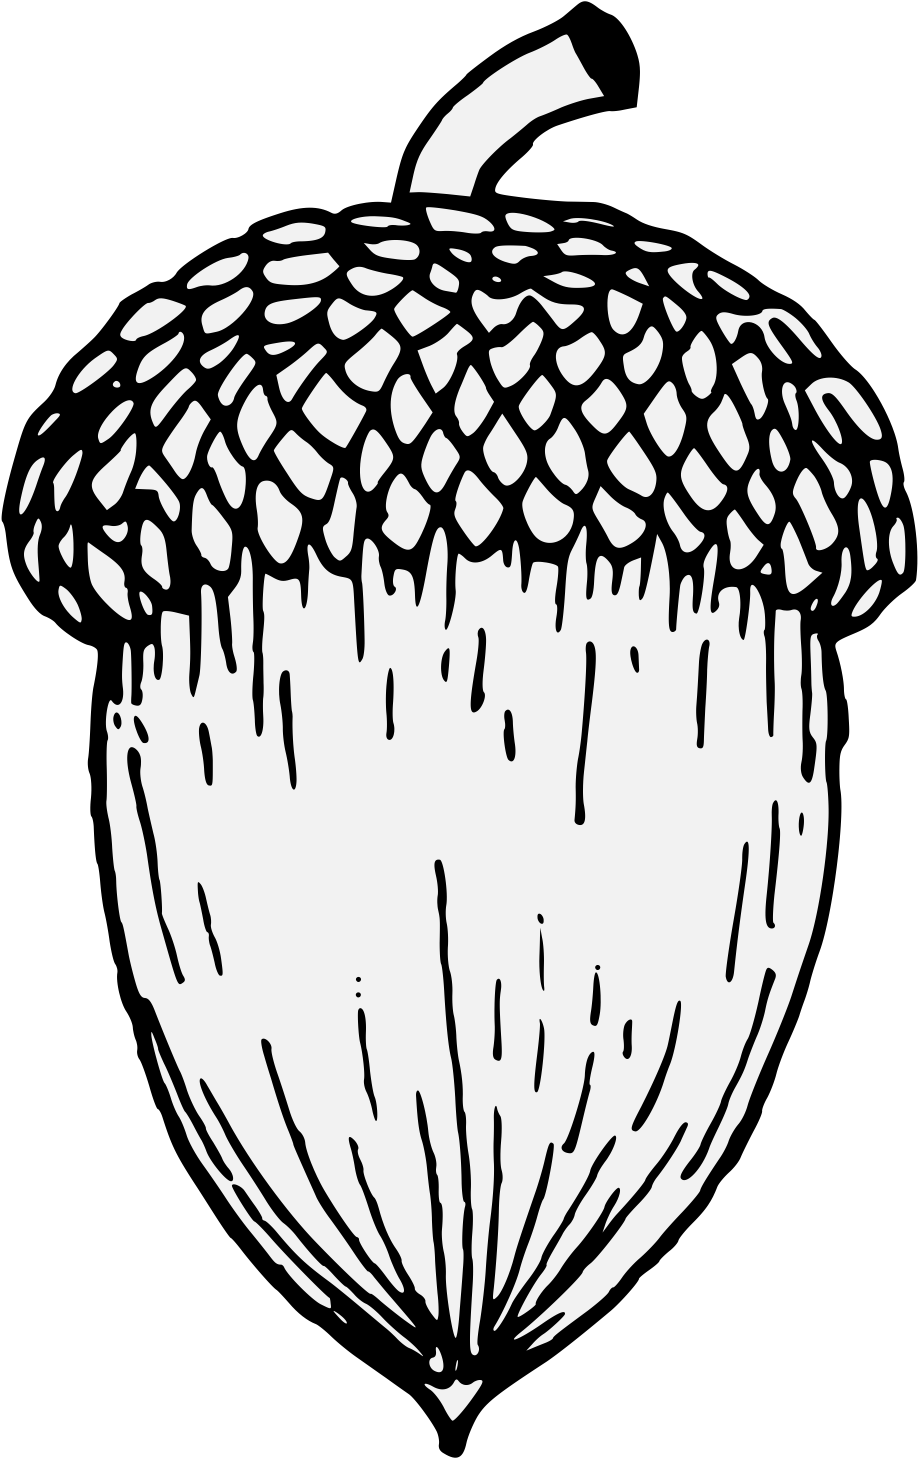 Acorn clipart line drawing. Clip art royalty free